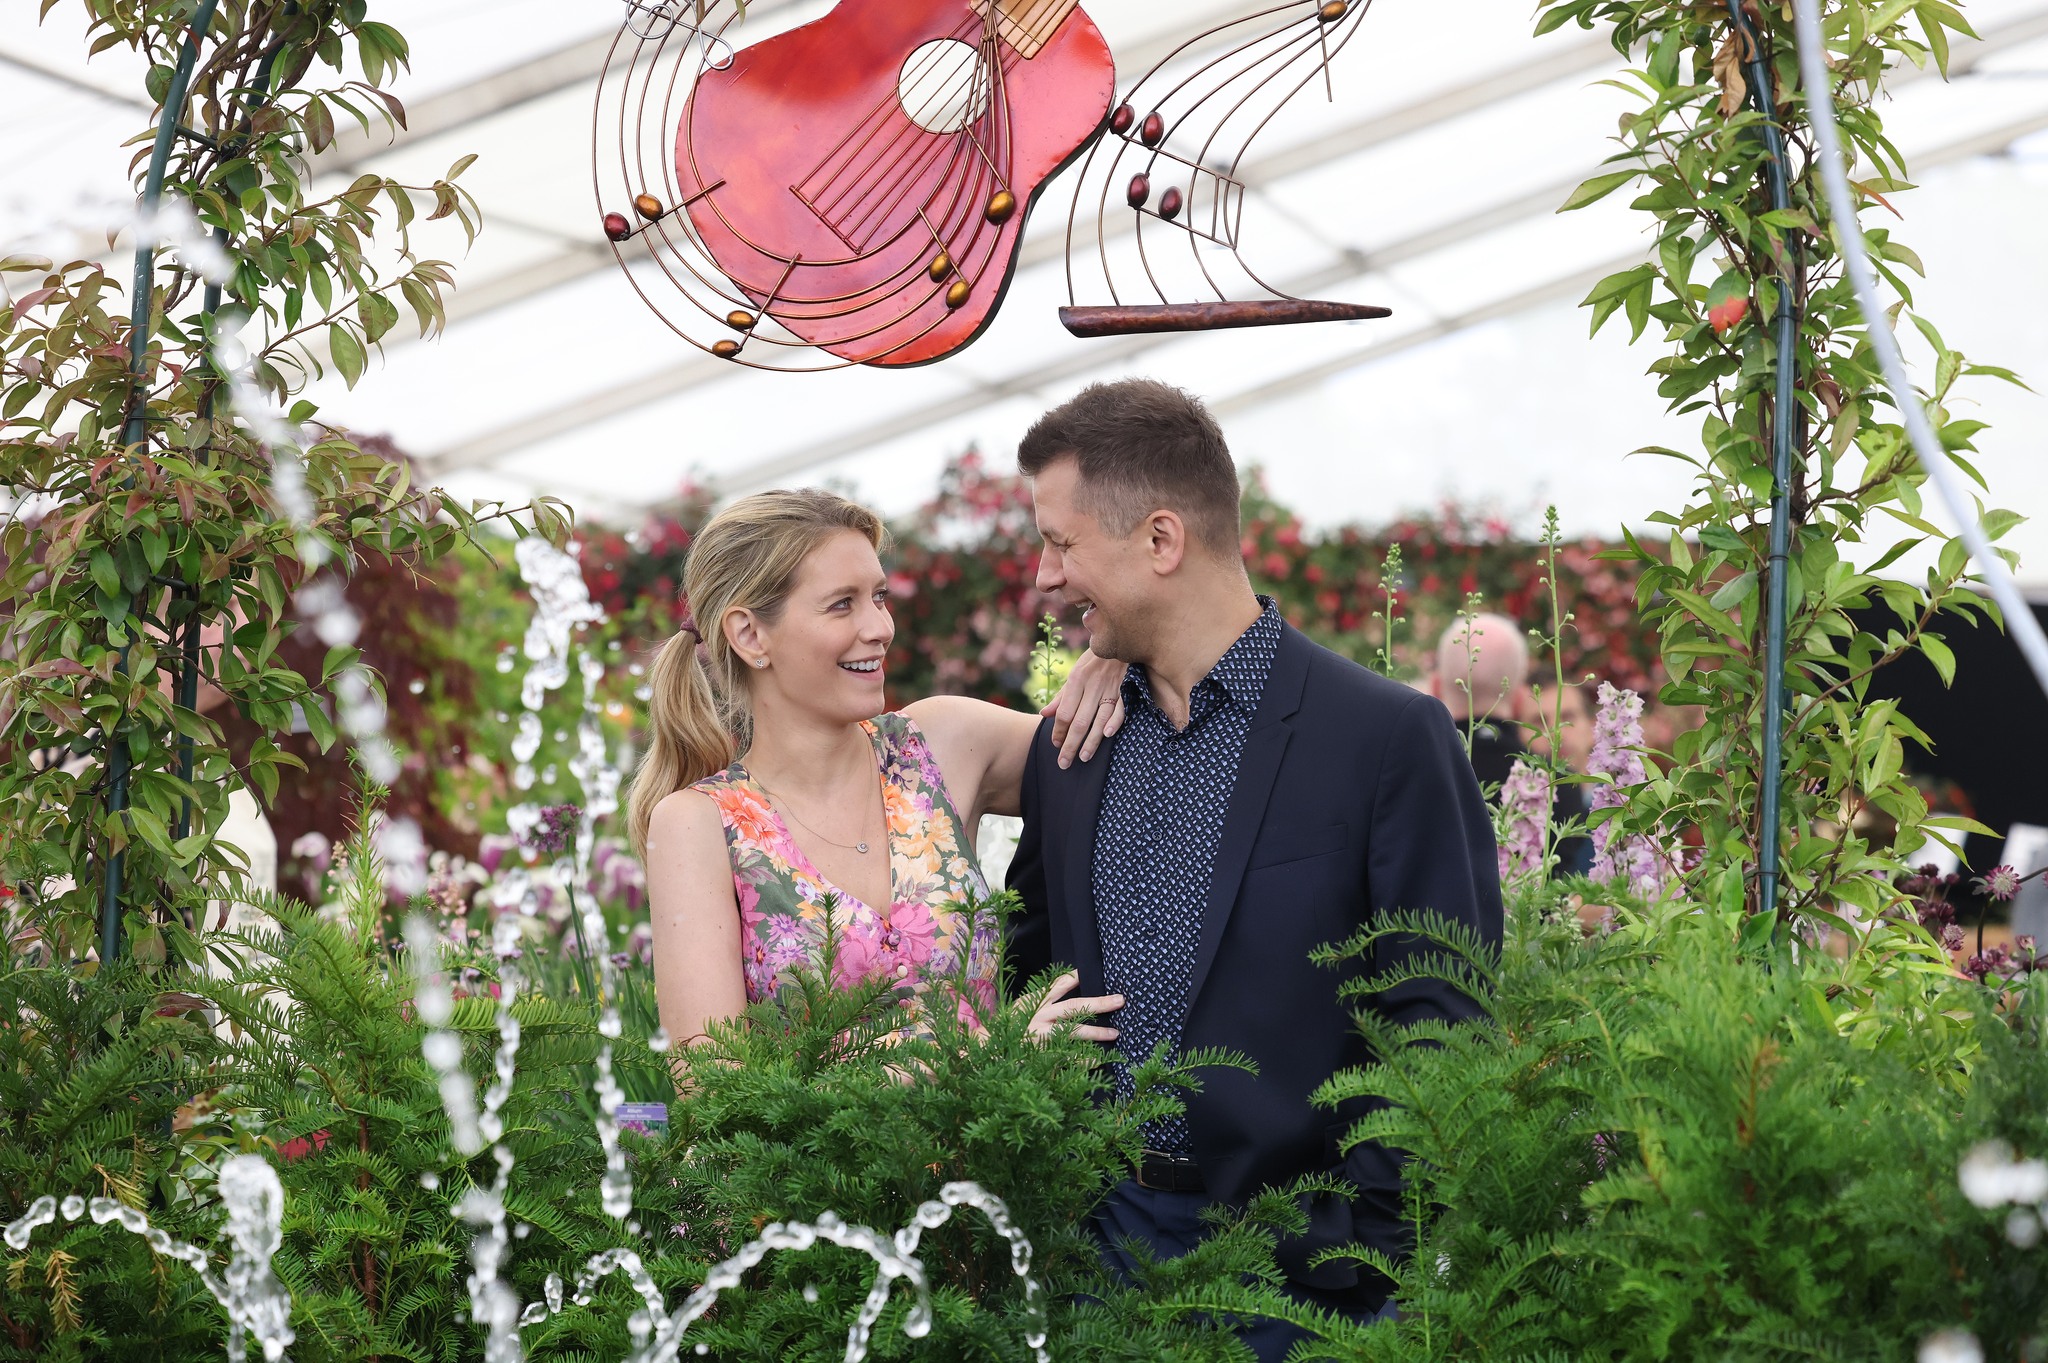 Countdown star Rachel Riley, her BBC Strictly Come Dancing partner Pasha Kovalev at Southport Flower Show. Picture by Gareth Jones